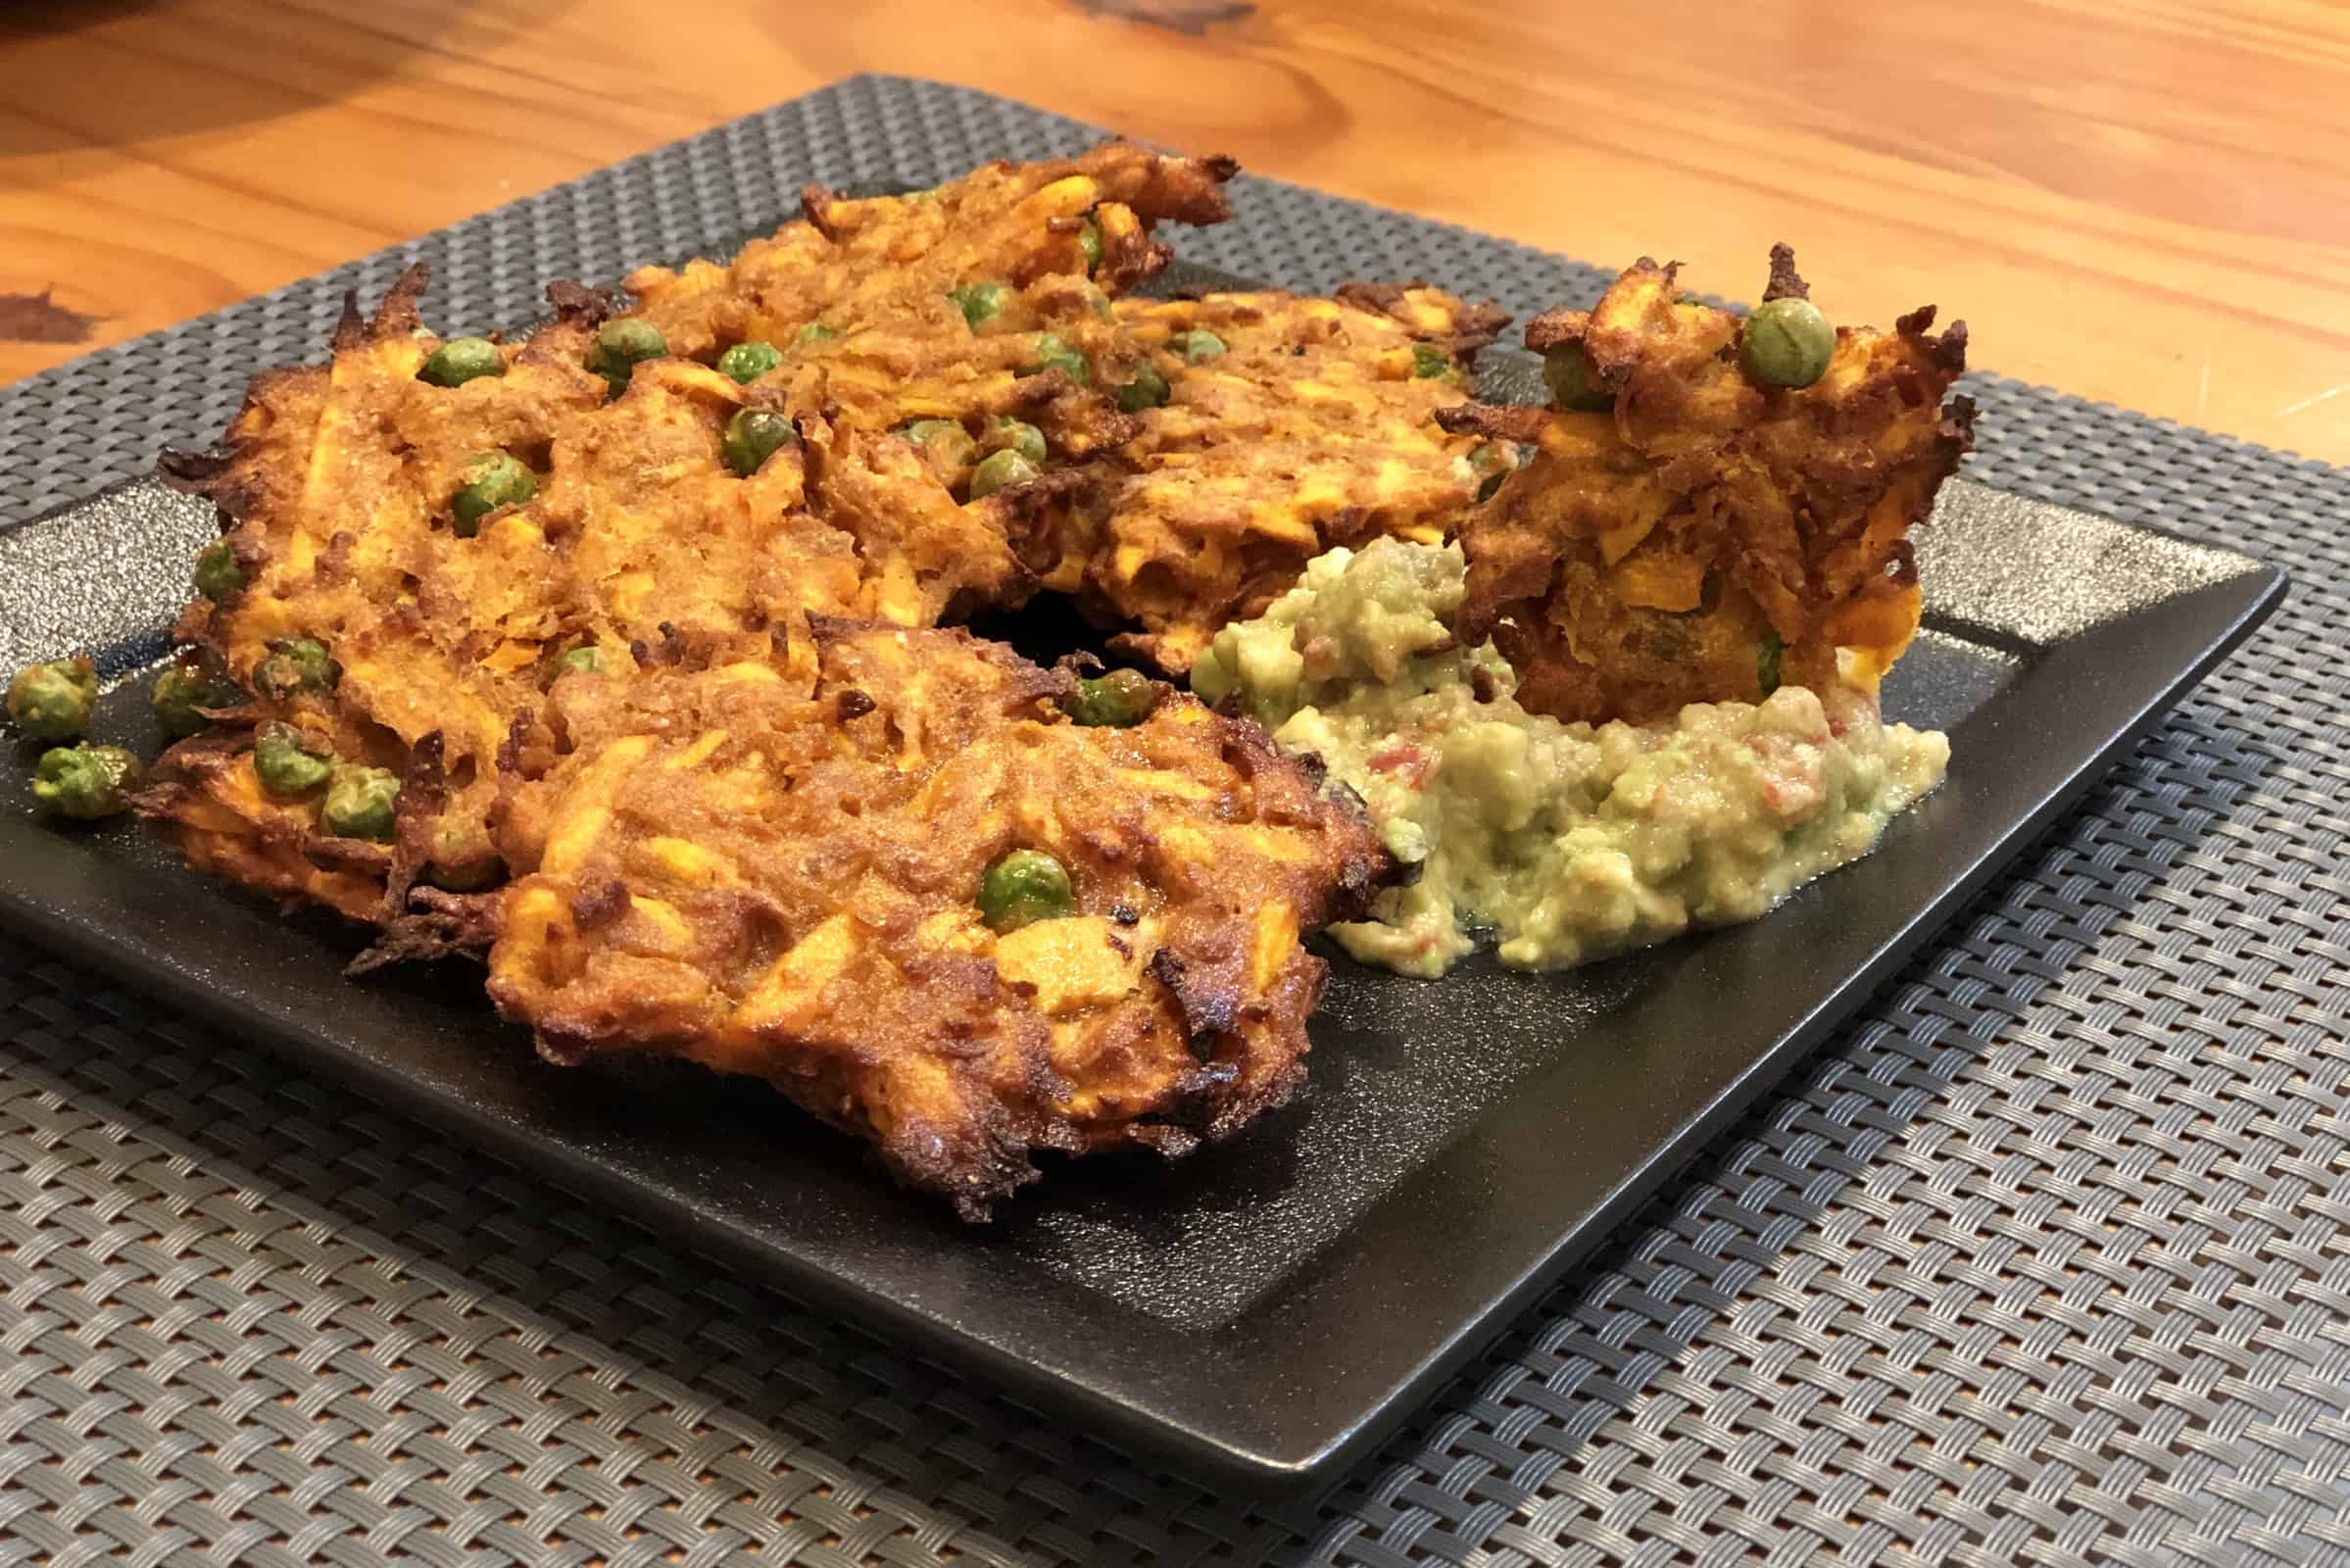 Curried Sweet Potato Fritters and guacamole on a black plate on a gray placemat on a wooden table